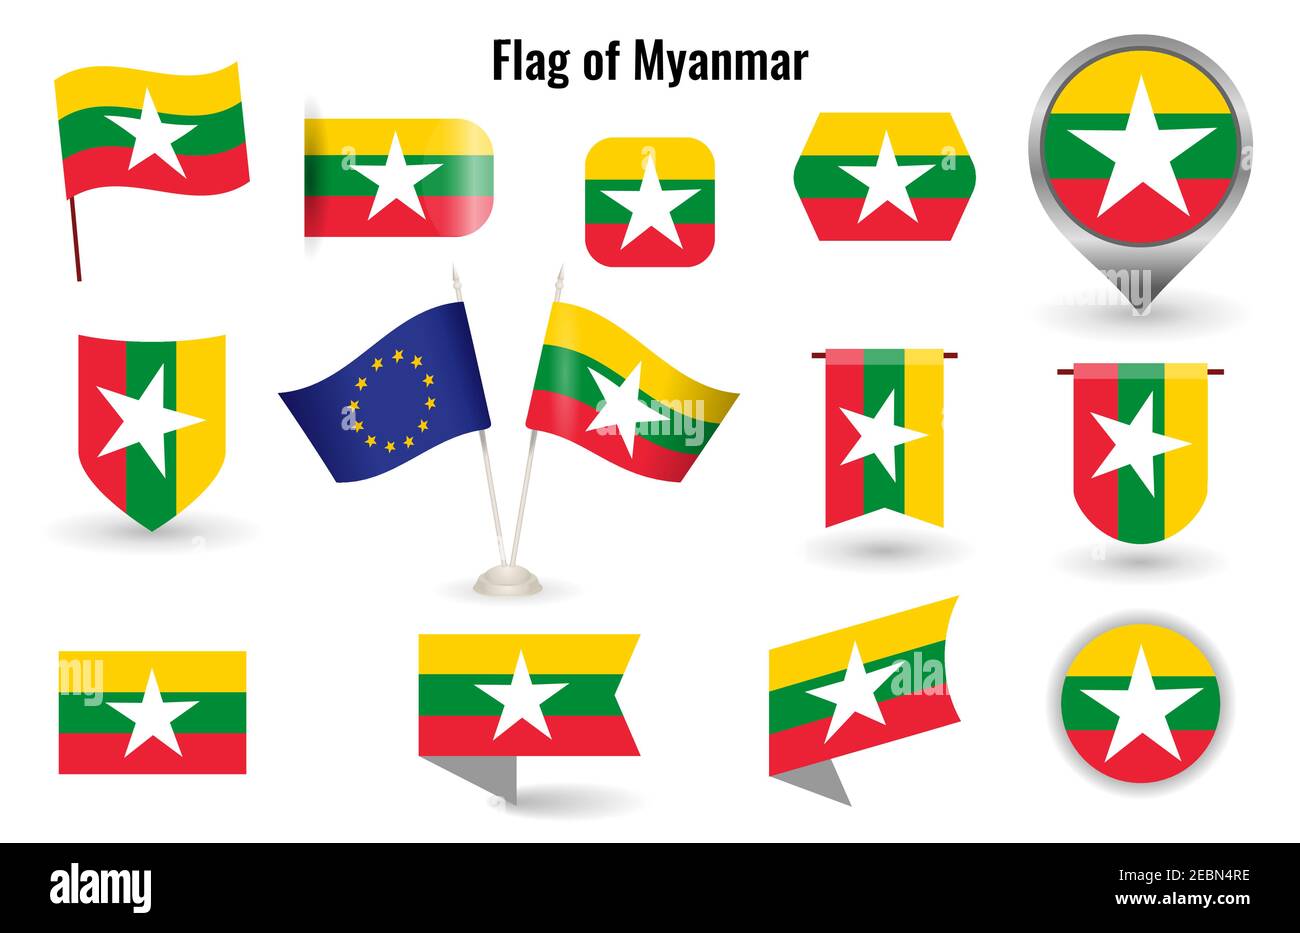 The Flag of Myanmar. Big set of icons and symbols. Square and round Myanmar flag. Collection of different flags of horizontal and vertical. vector ill Stock Vector